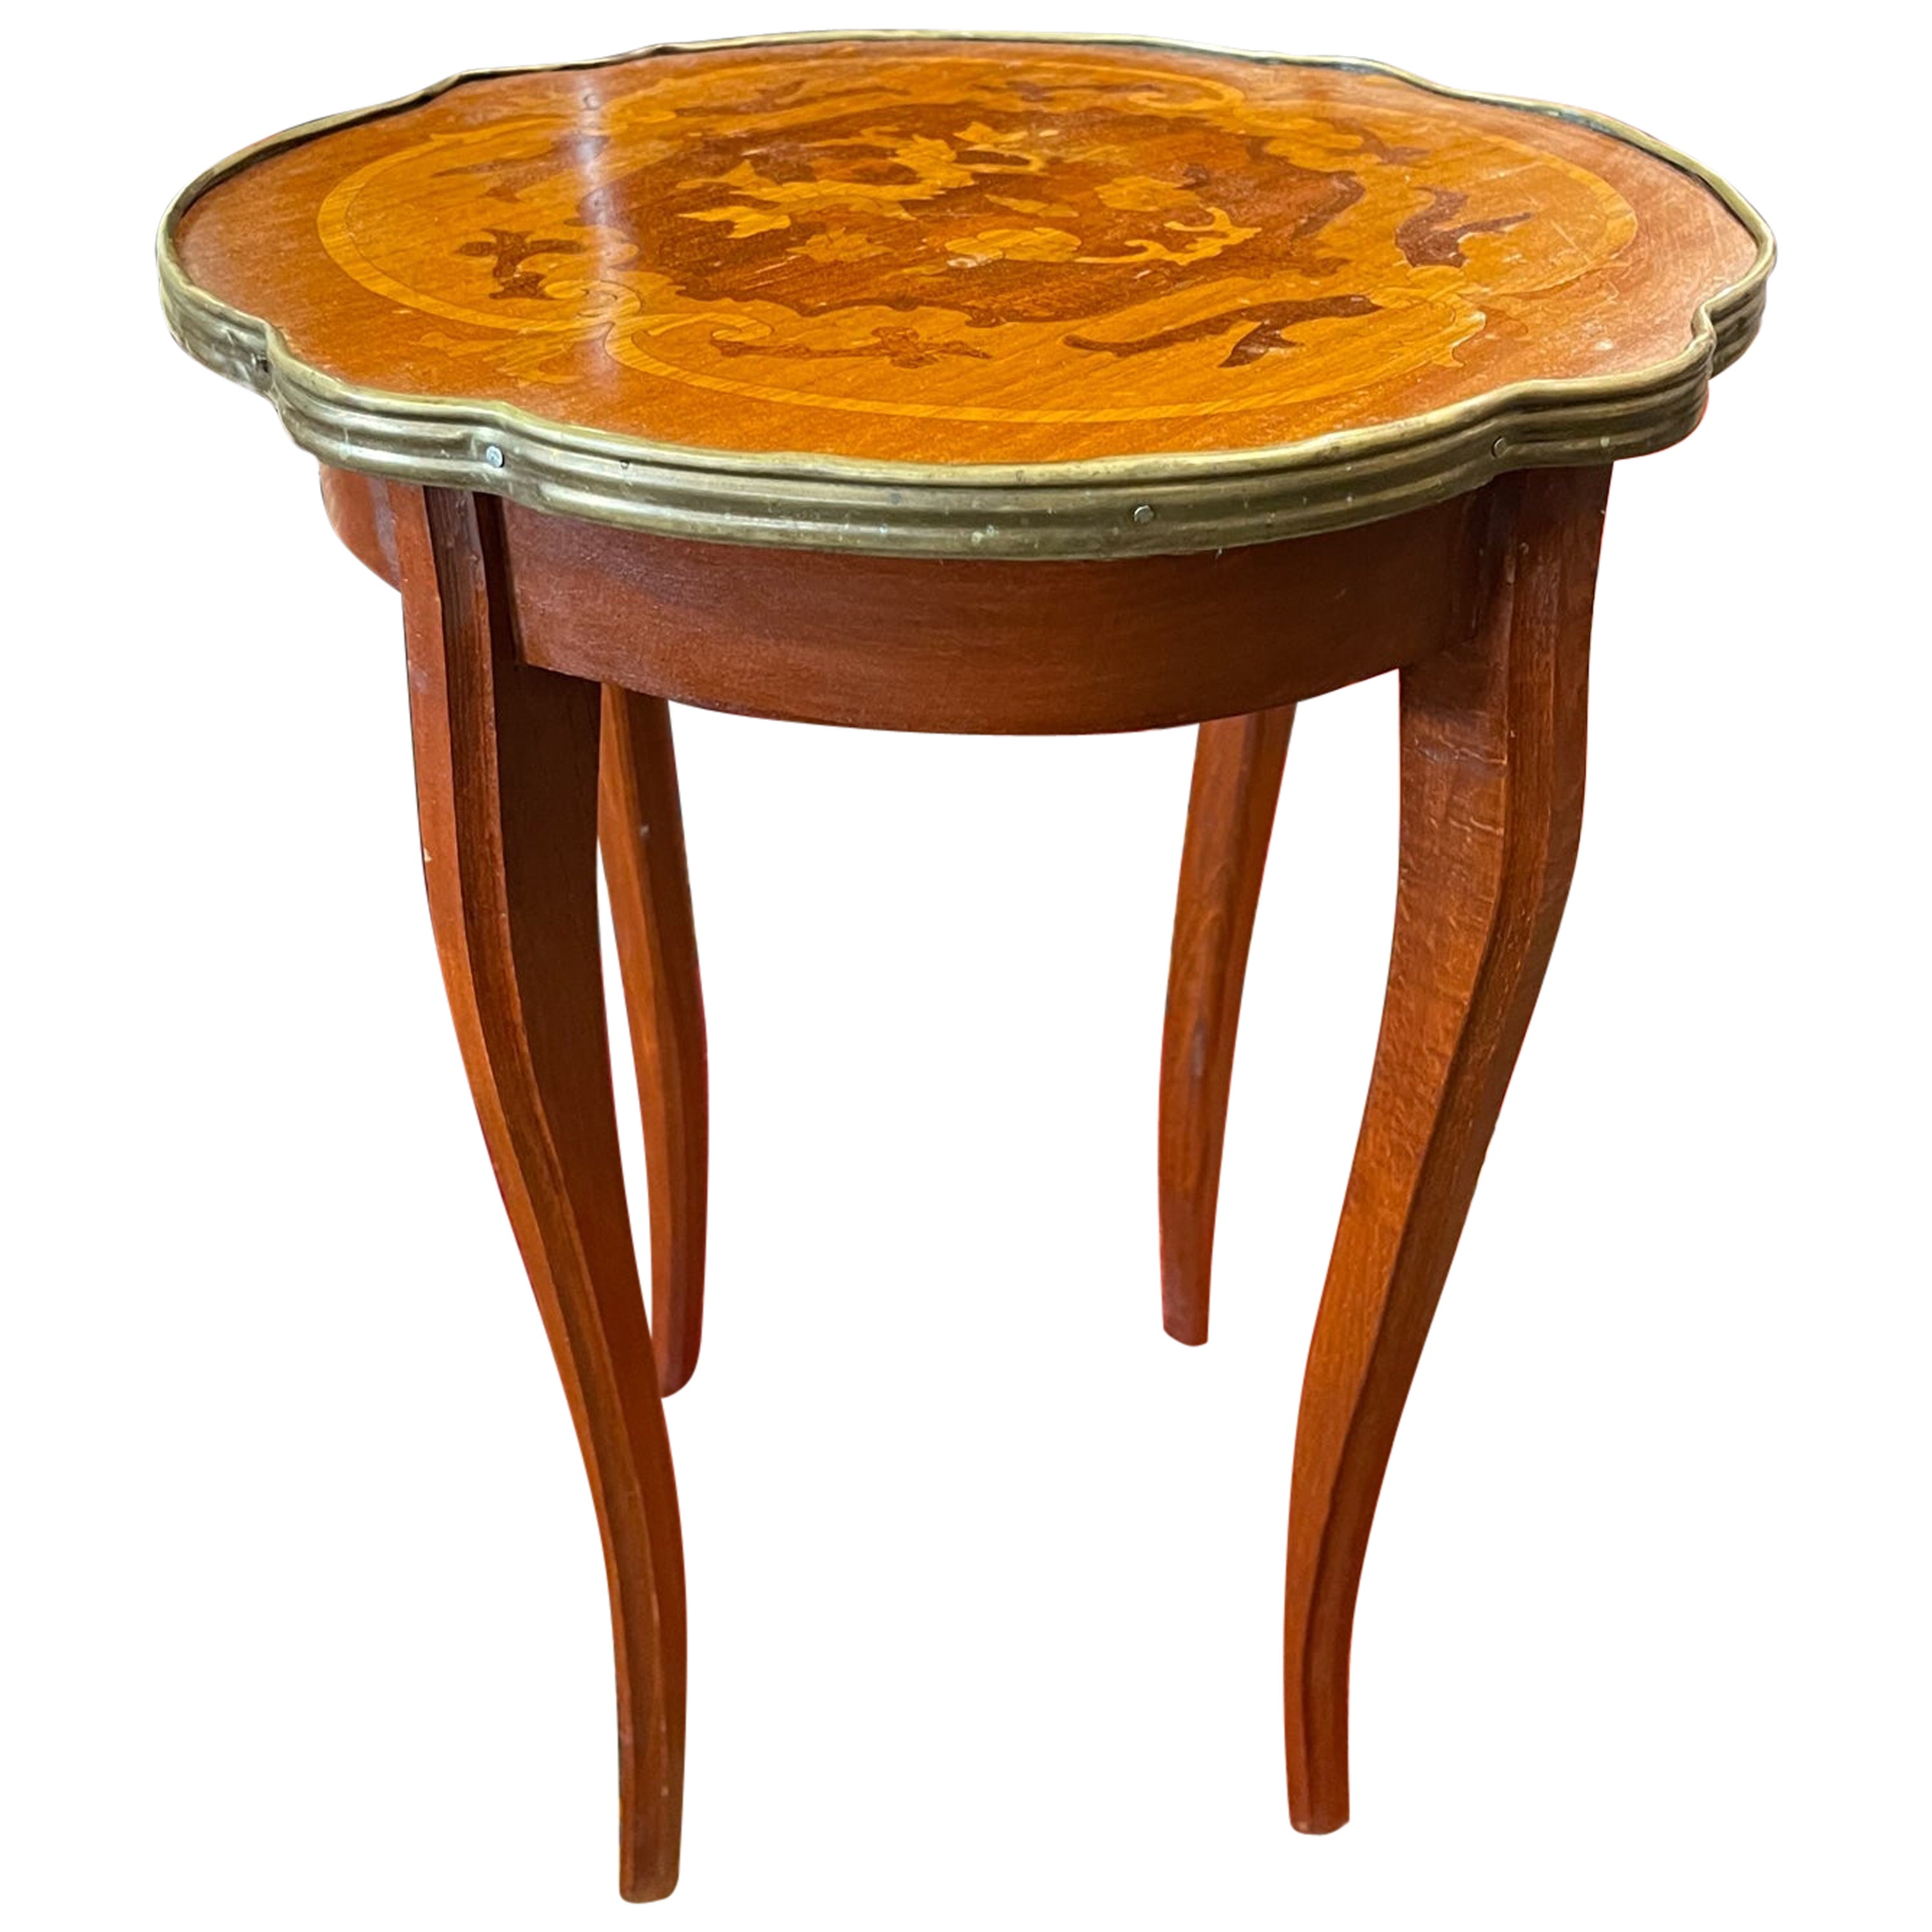 French Marquetry Side Table with a Brass Trim Around Wood Top, 20th Century